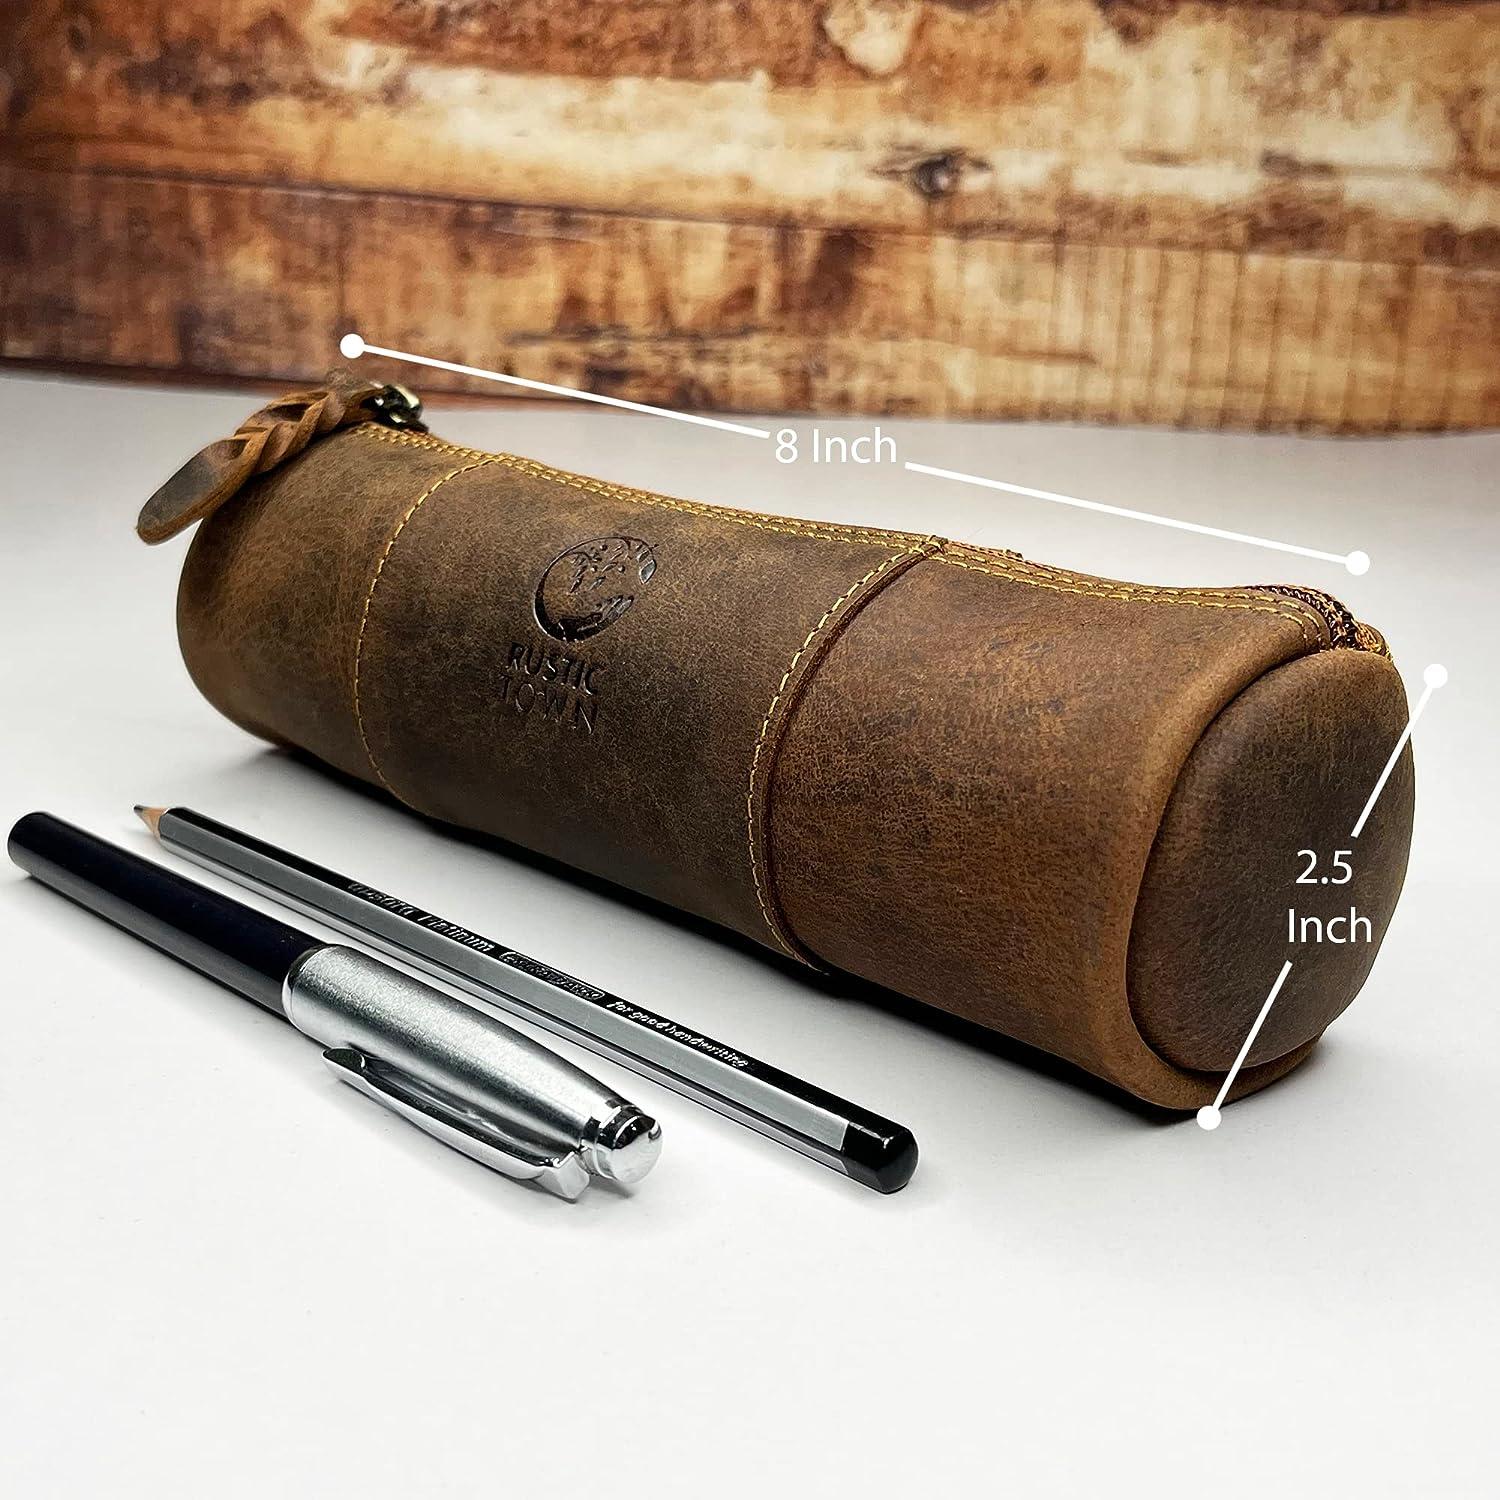 RUSTIC TOWN Leather Pencil Pouch - Zippered Pen Case for Work & Office ( Brown)